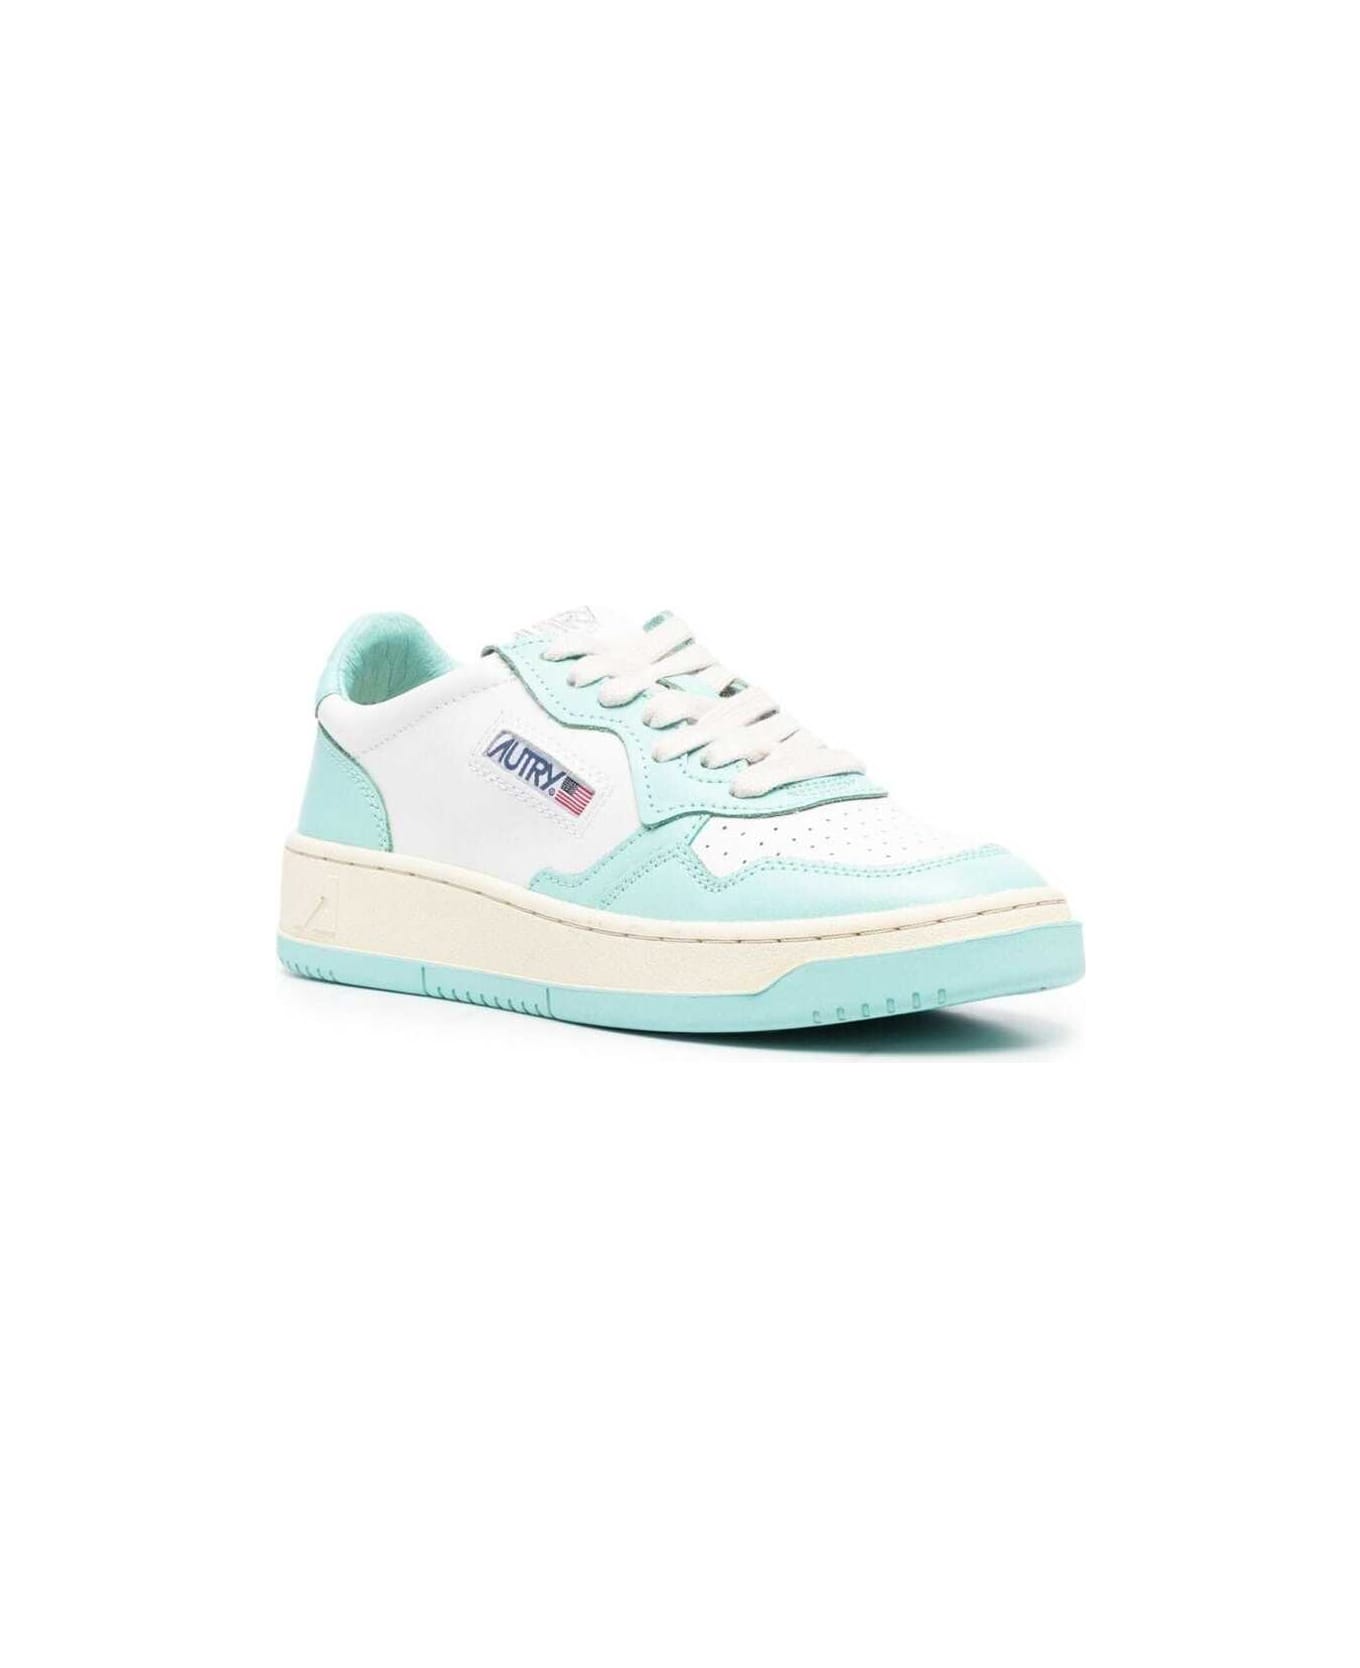 Autry Medalist Lace-up Sneakers - Leat Turquoise スニーカー